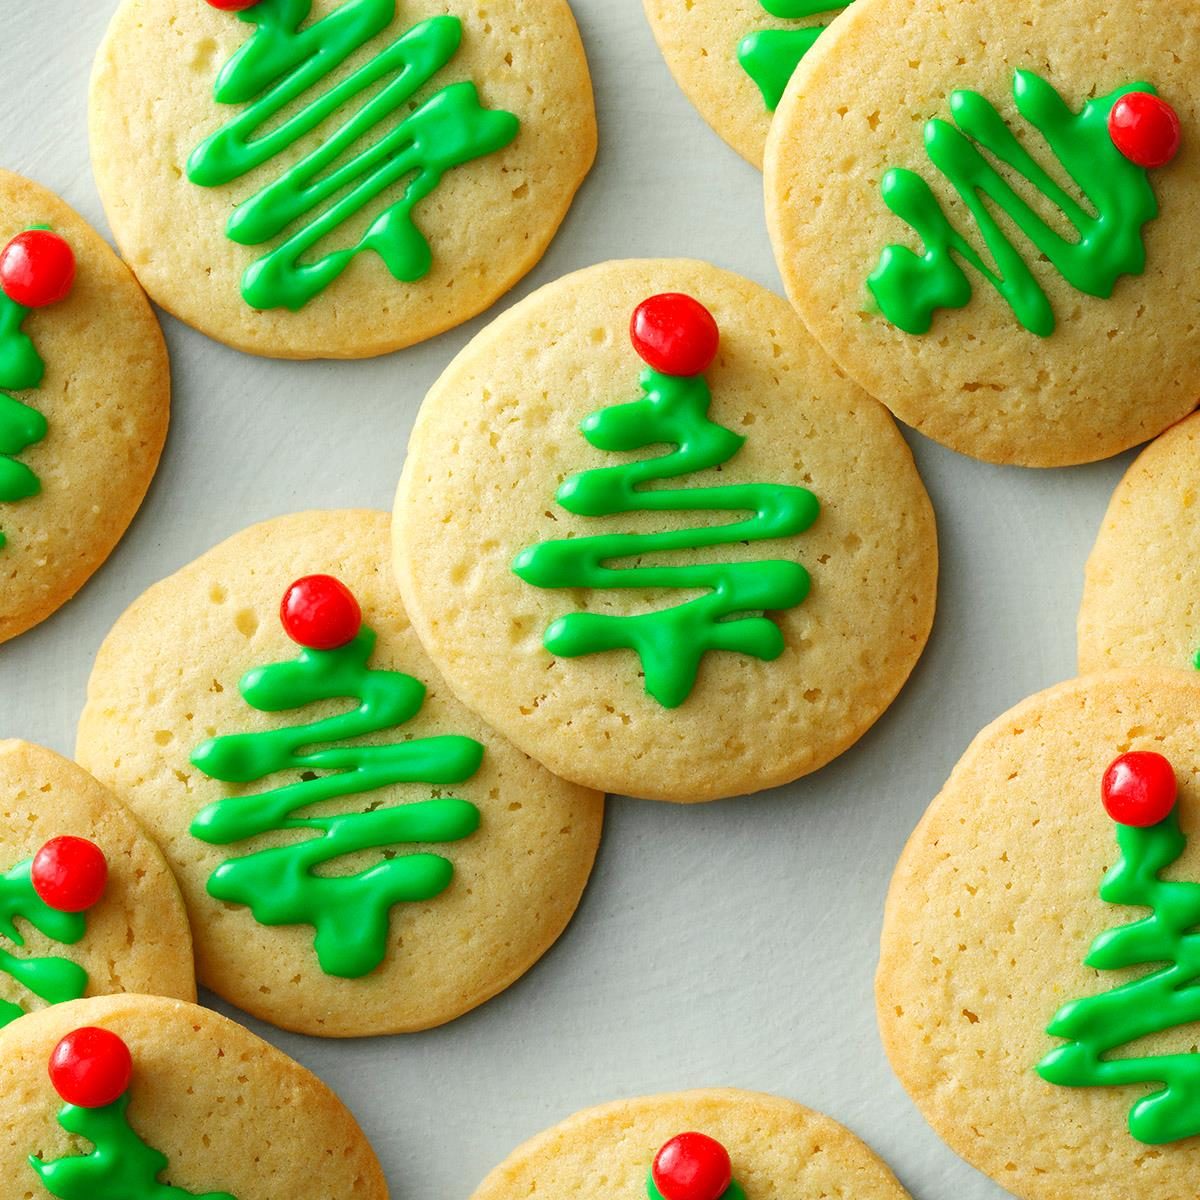 https://www.tasteofhome.com/wp-content/uploads/2018/01/Holiday-Sugar-Cookies_EXPS_HCBZ22_21719_DR_06_02_1b-4.jpg